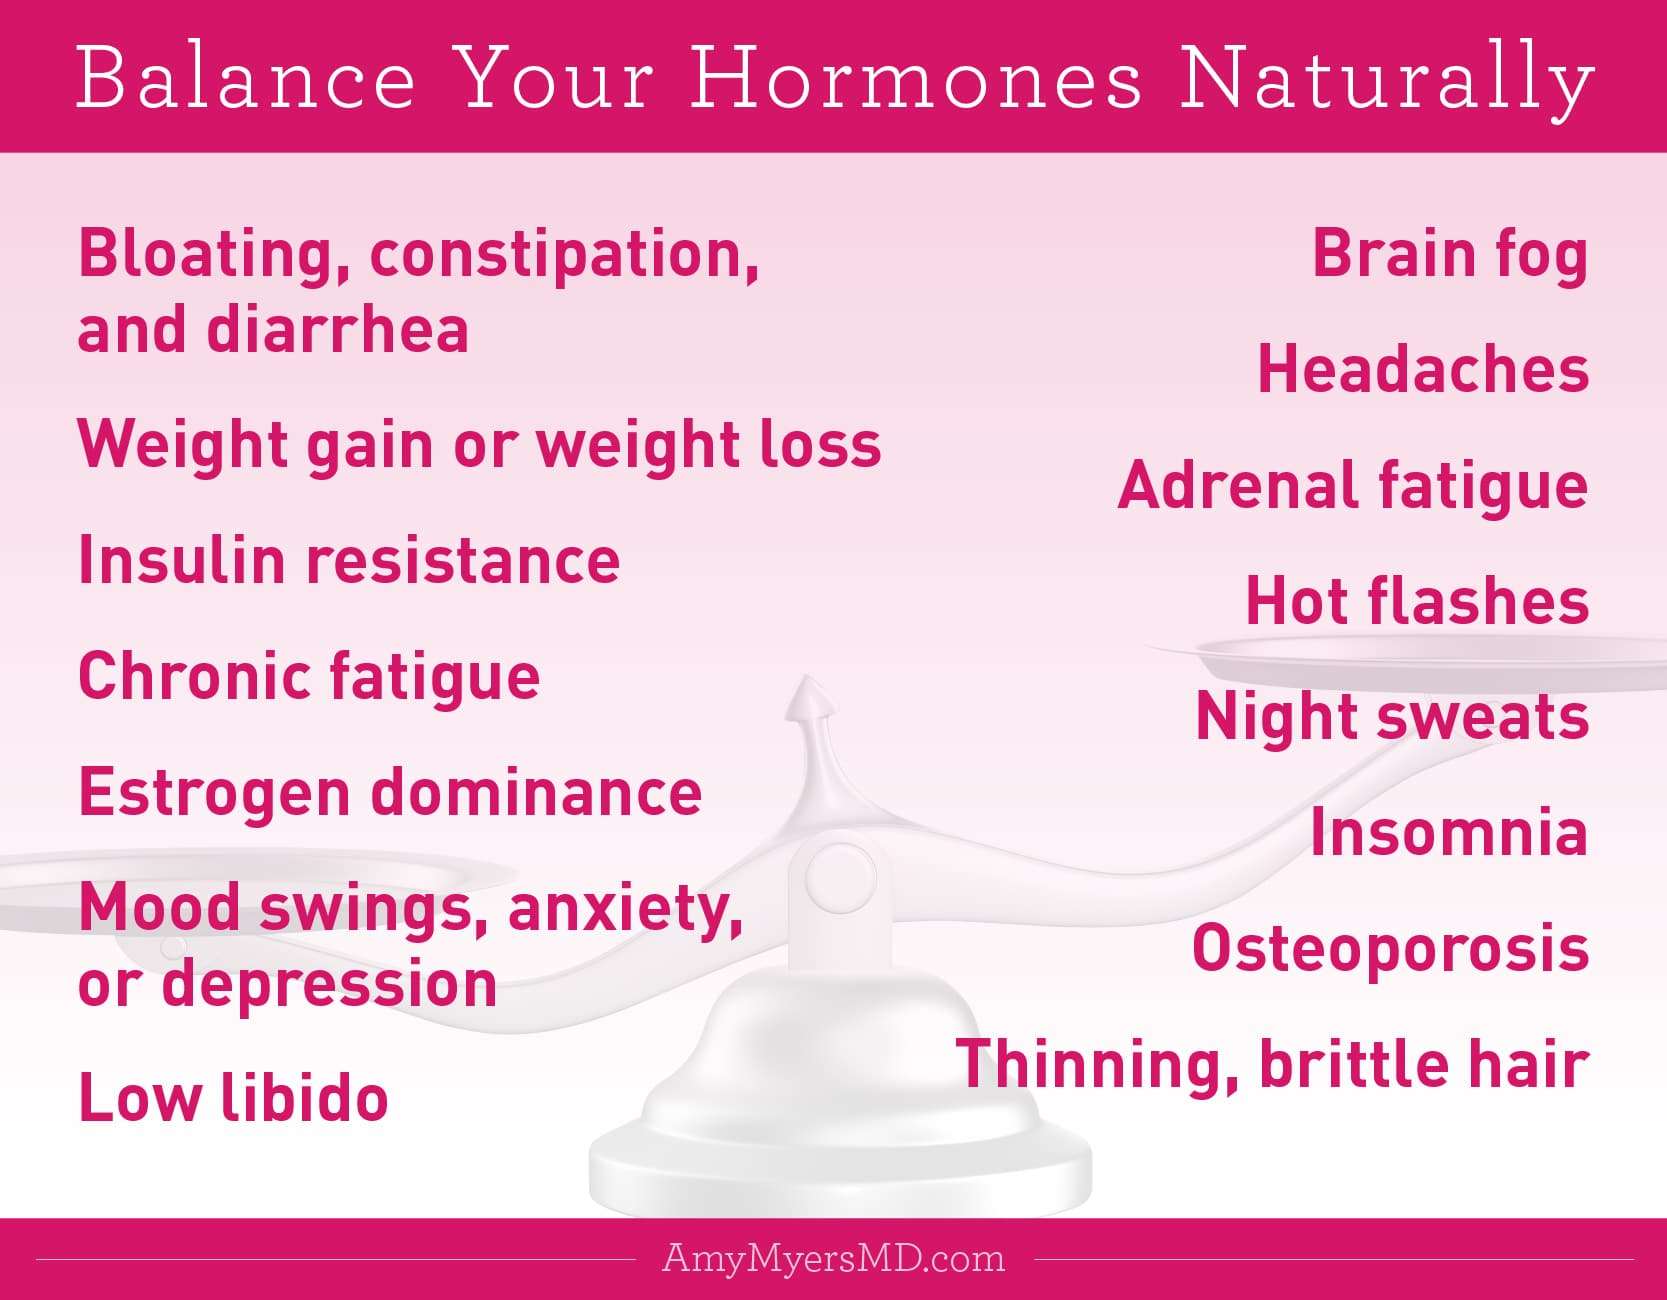 8 Tips to Balance Your HormonesNaturally